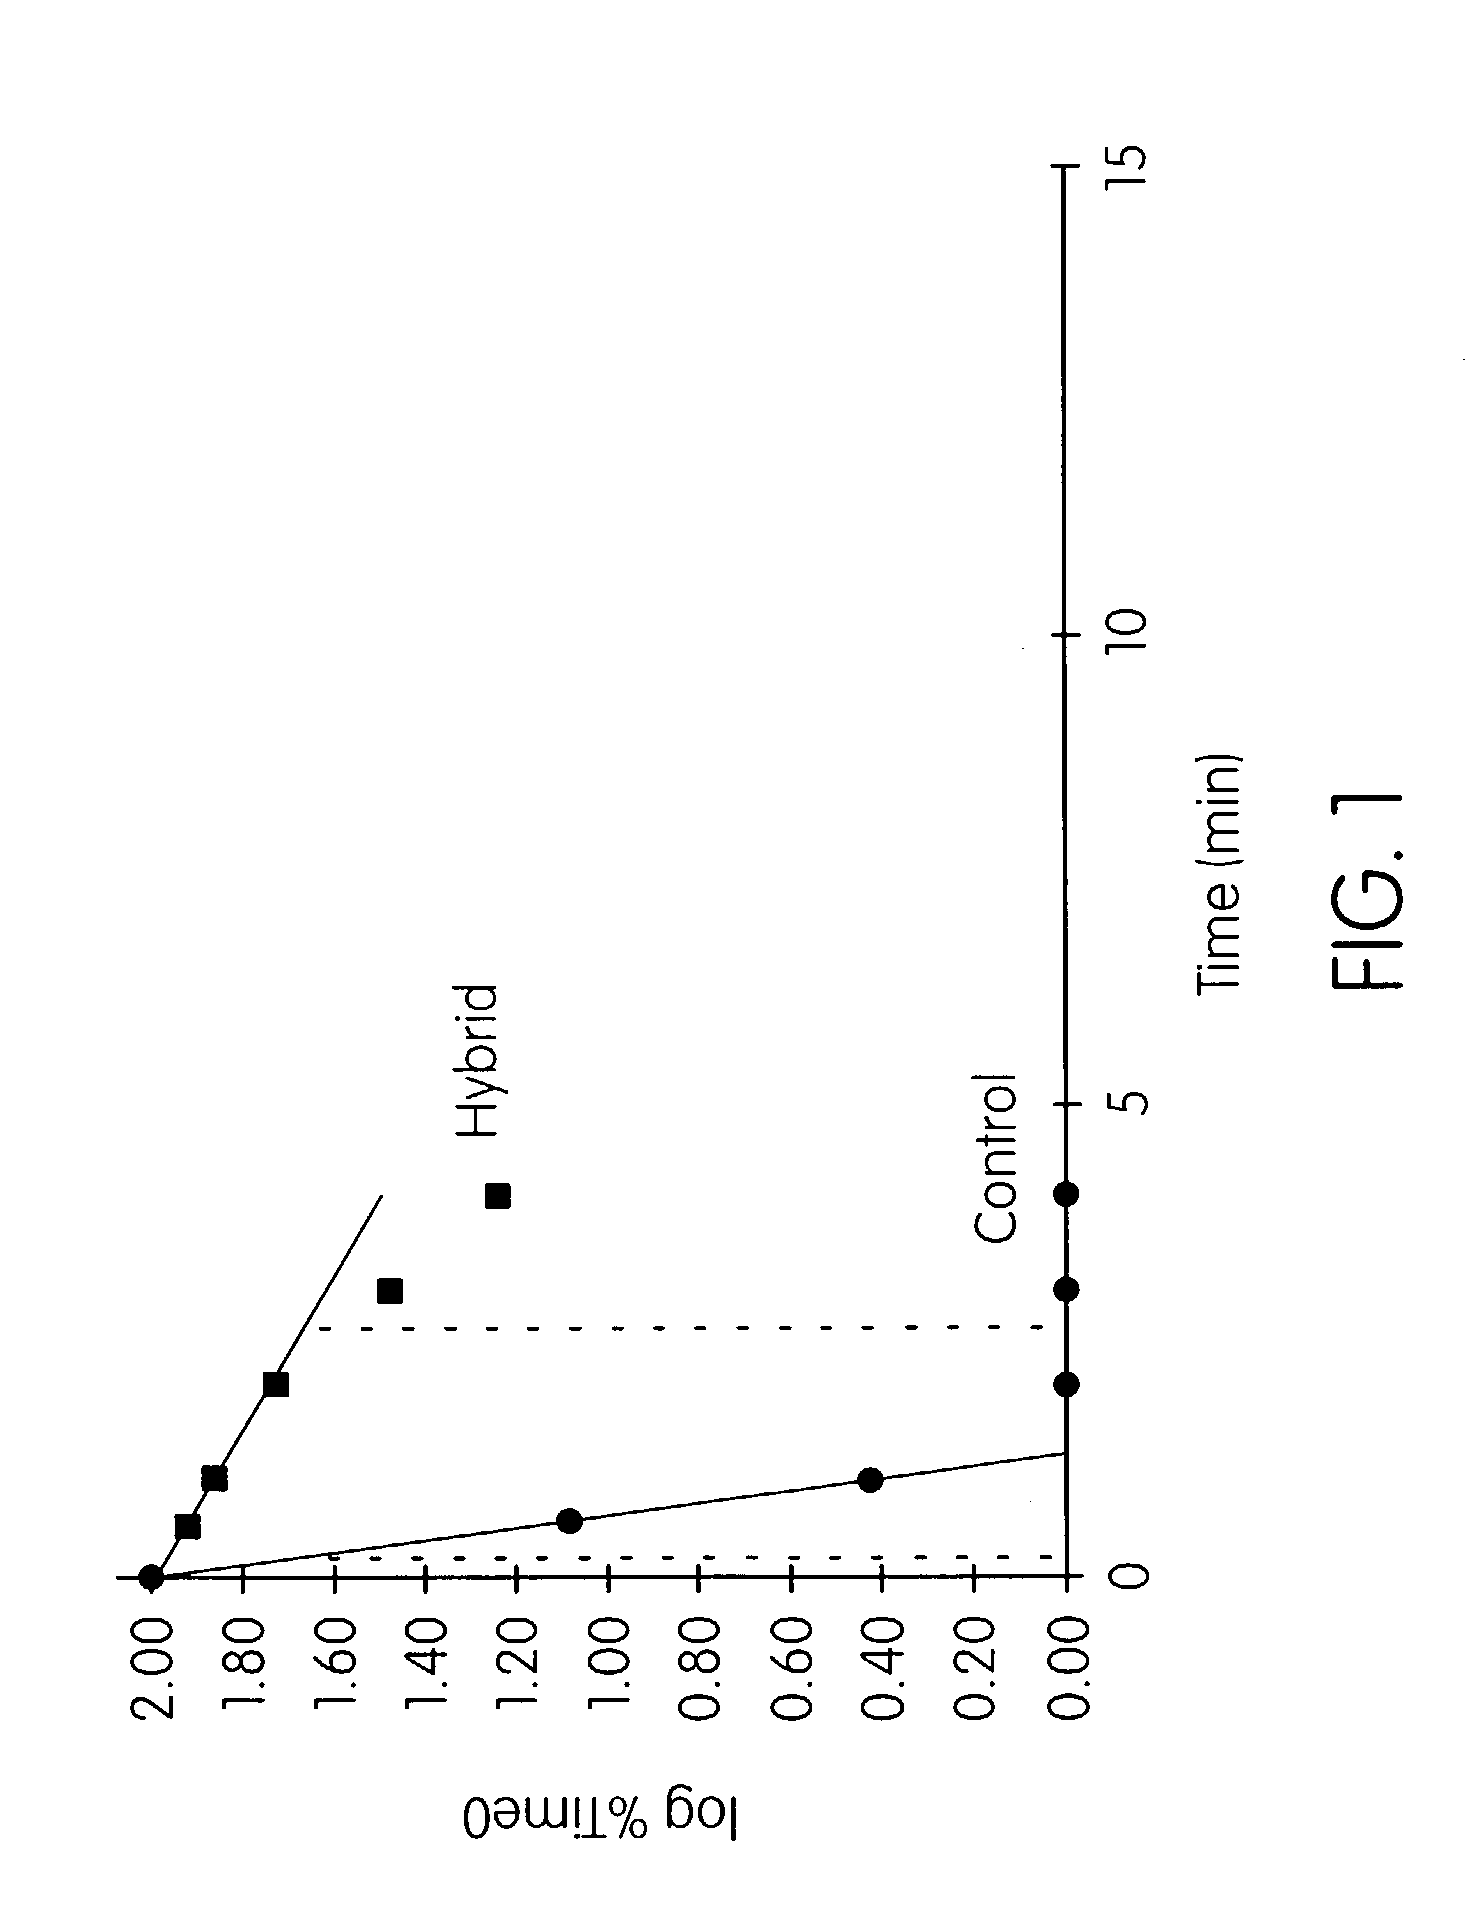 Probes, compositions and kits for determining the presence of Mycoplasma pneuomoniae in a test sample